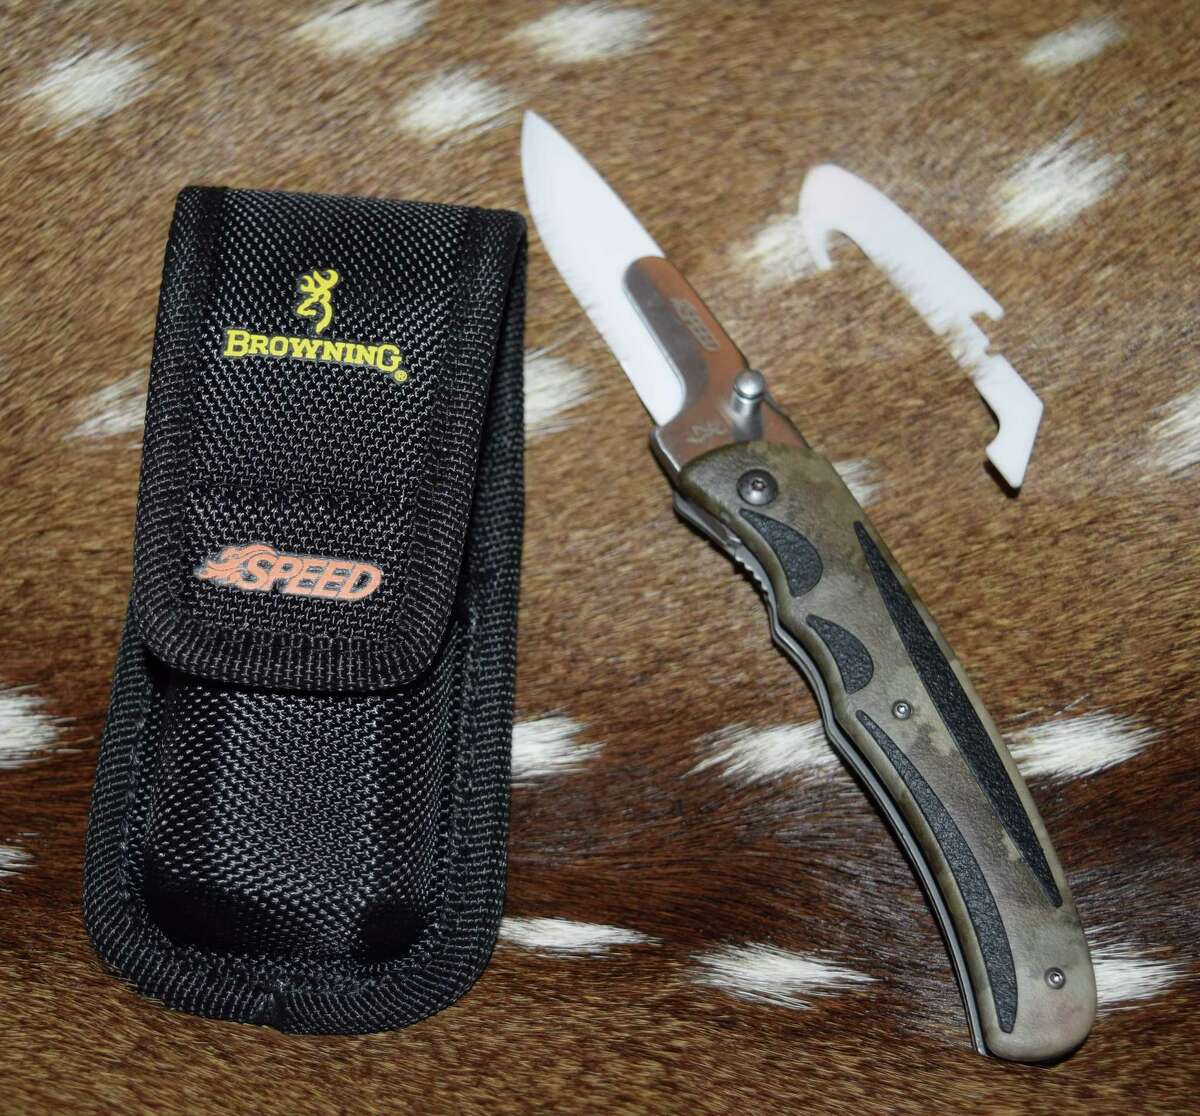 Browning’s Speed Load Ceramic knife, the latest cutting and field dressing tool for hunters.